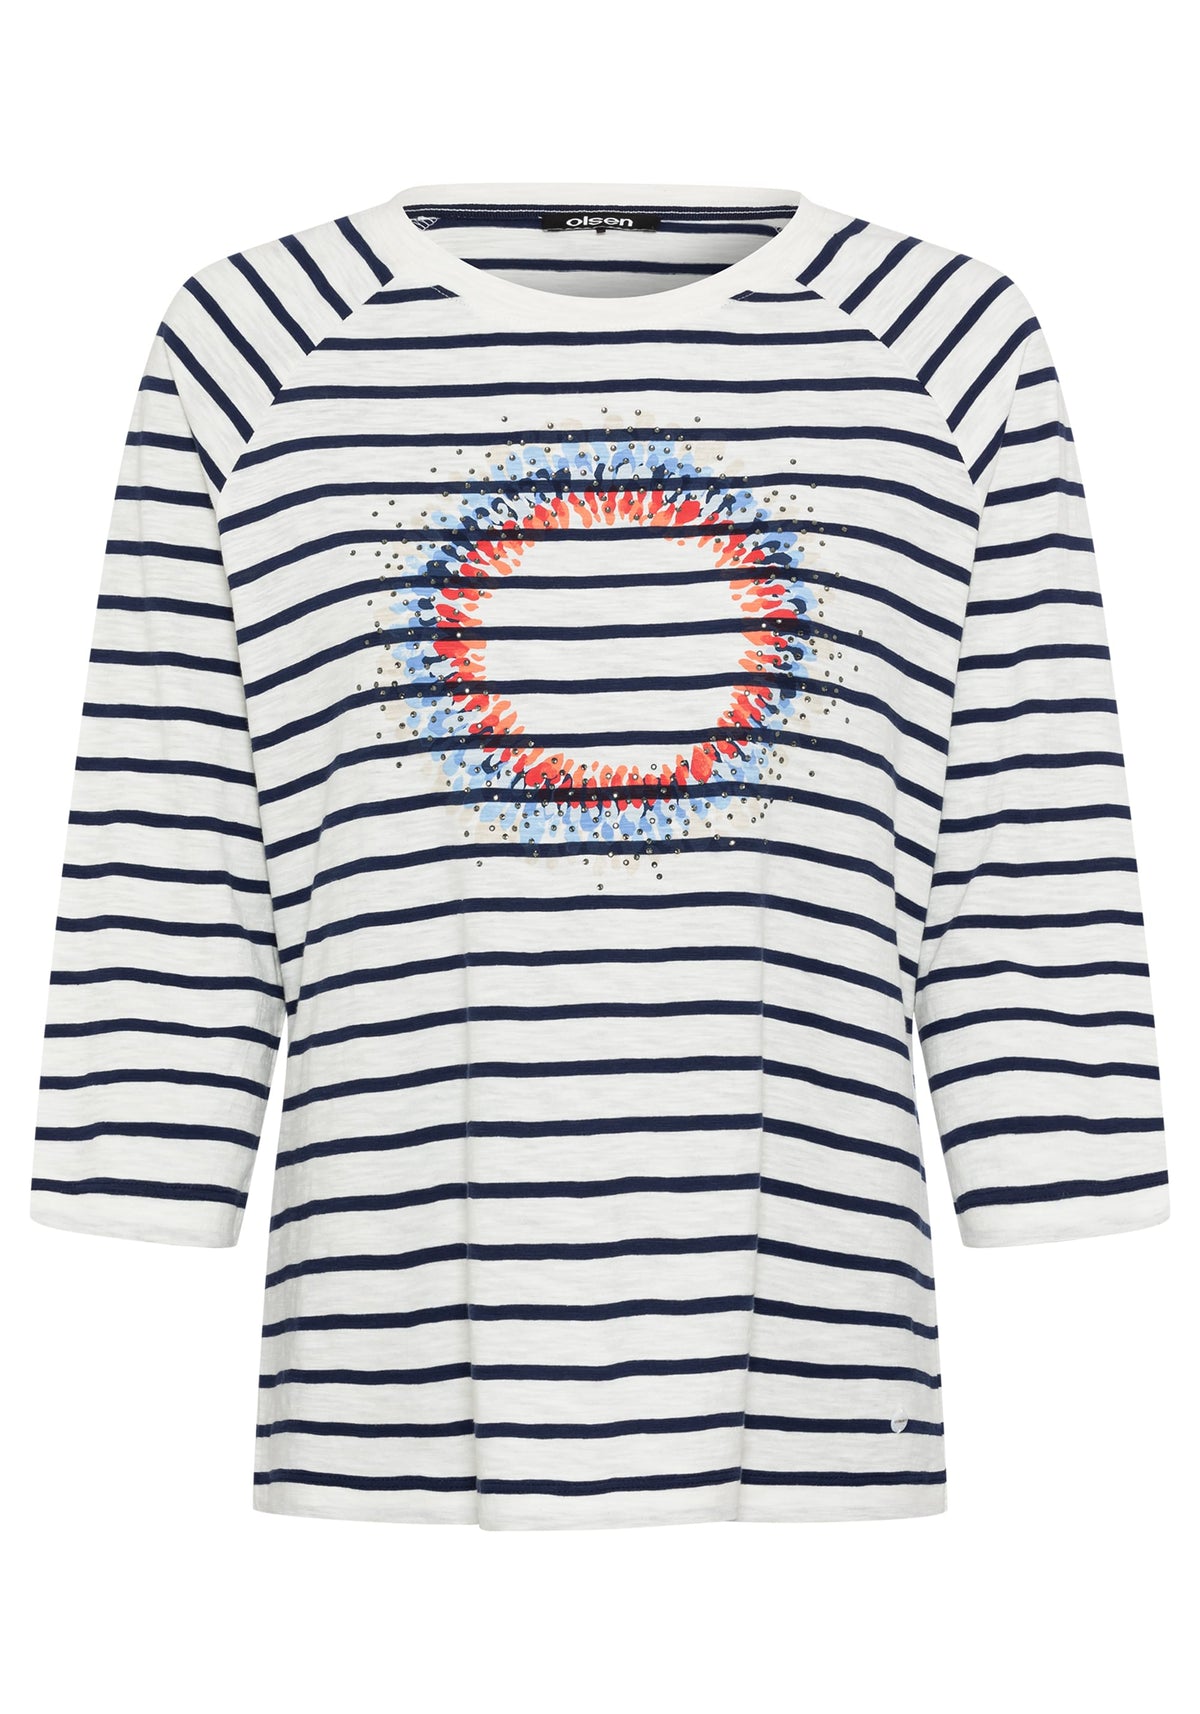 100% Cotton 3/4 Sleeve Striped and Embellished Placement Print T-Shirt